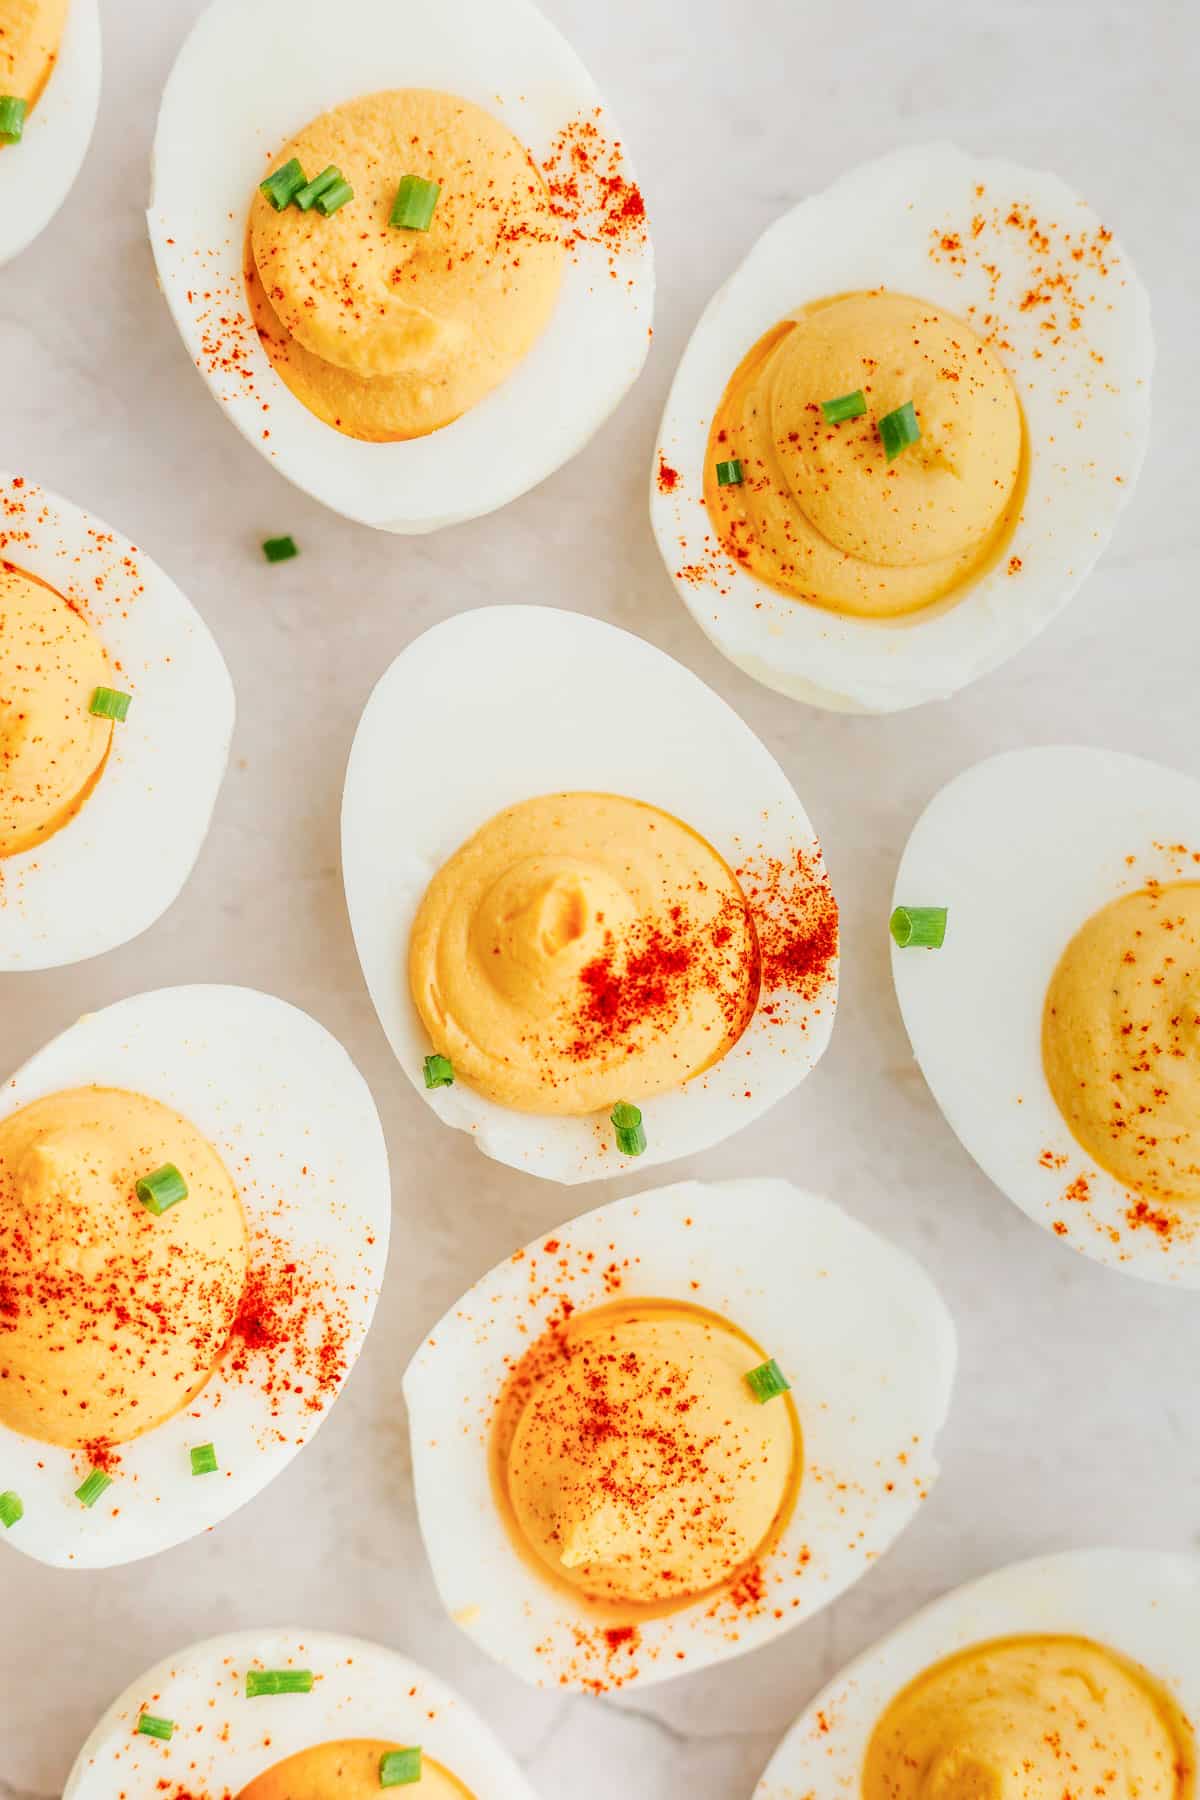 https://thewholecook.com/wp-content/uploads/2023/03/Easy-Deviled-Eggs-with-Paprika-1-4.jpg